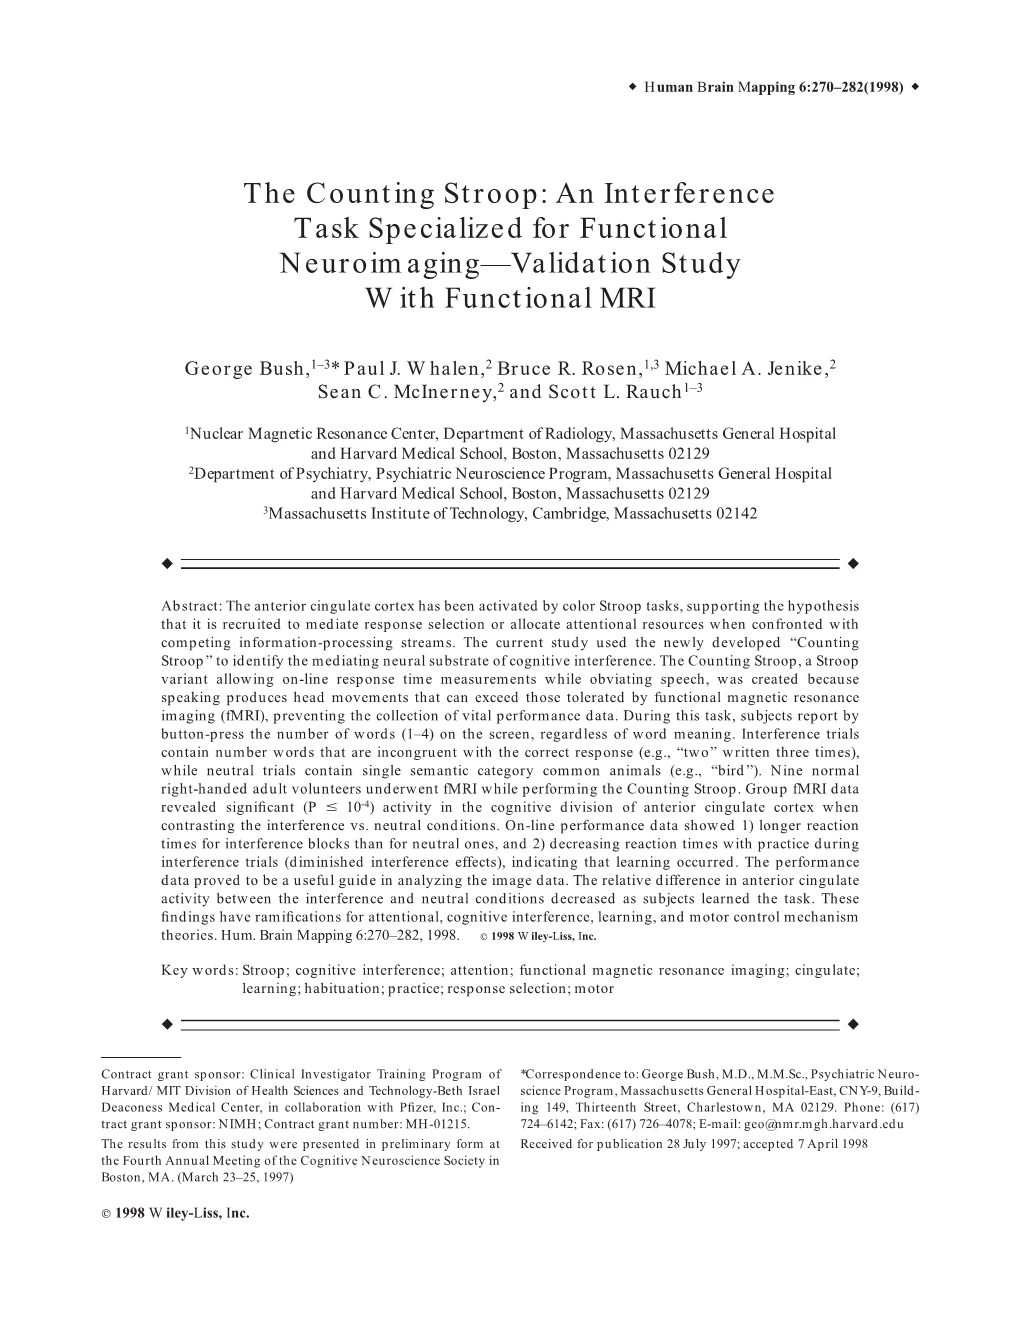 The Counting Stroop: an Interference Task Specialized for Functional Neuroimaging—Validation Study with Functional MRI